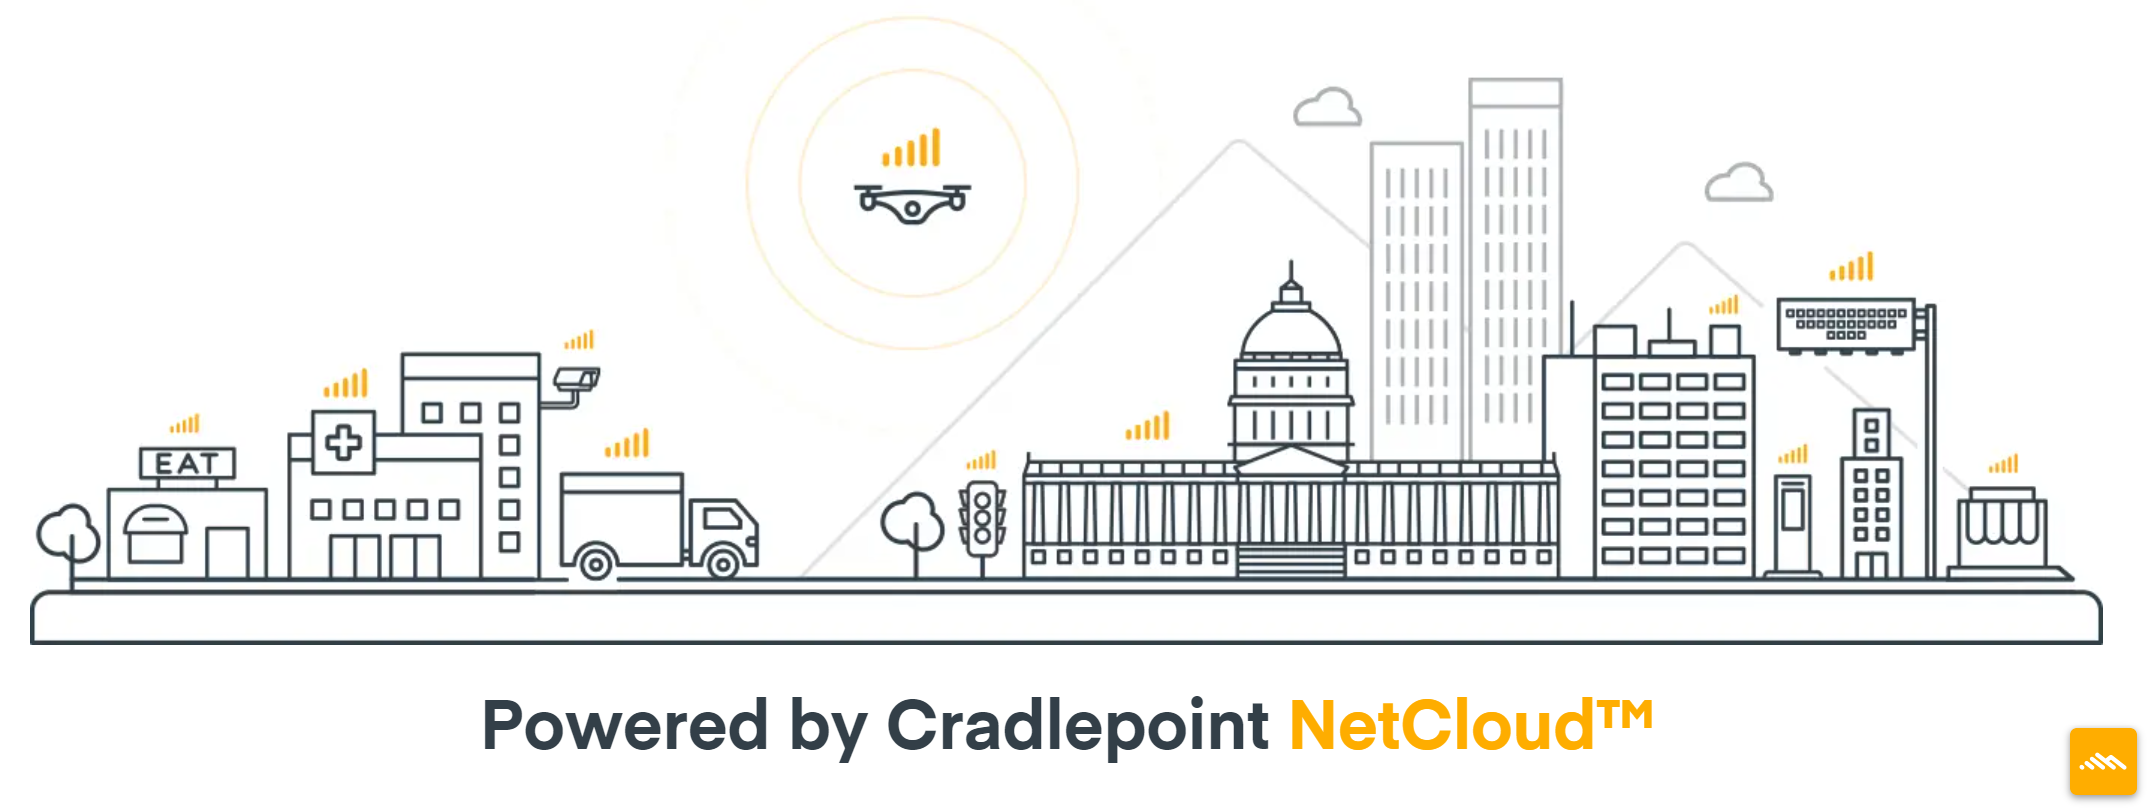 Cradlepoint powered by NetCloud